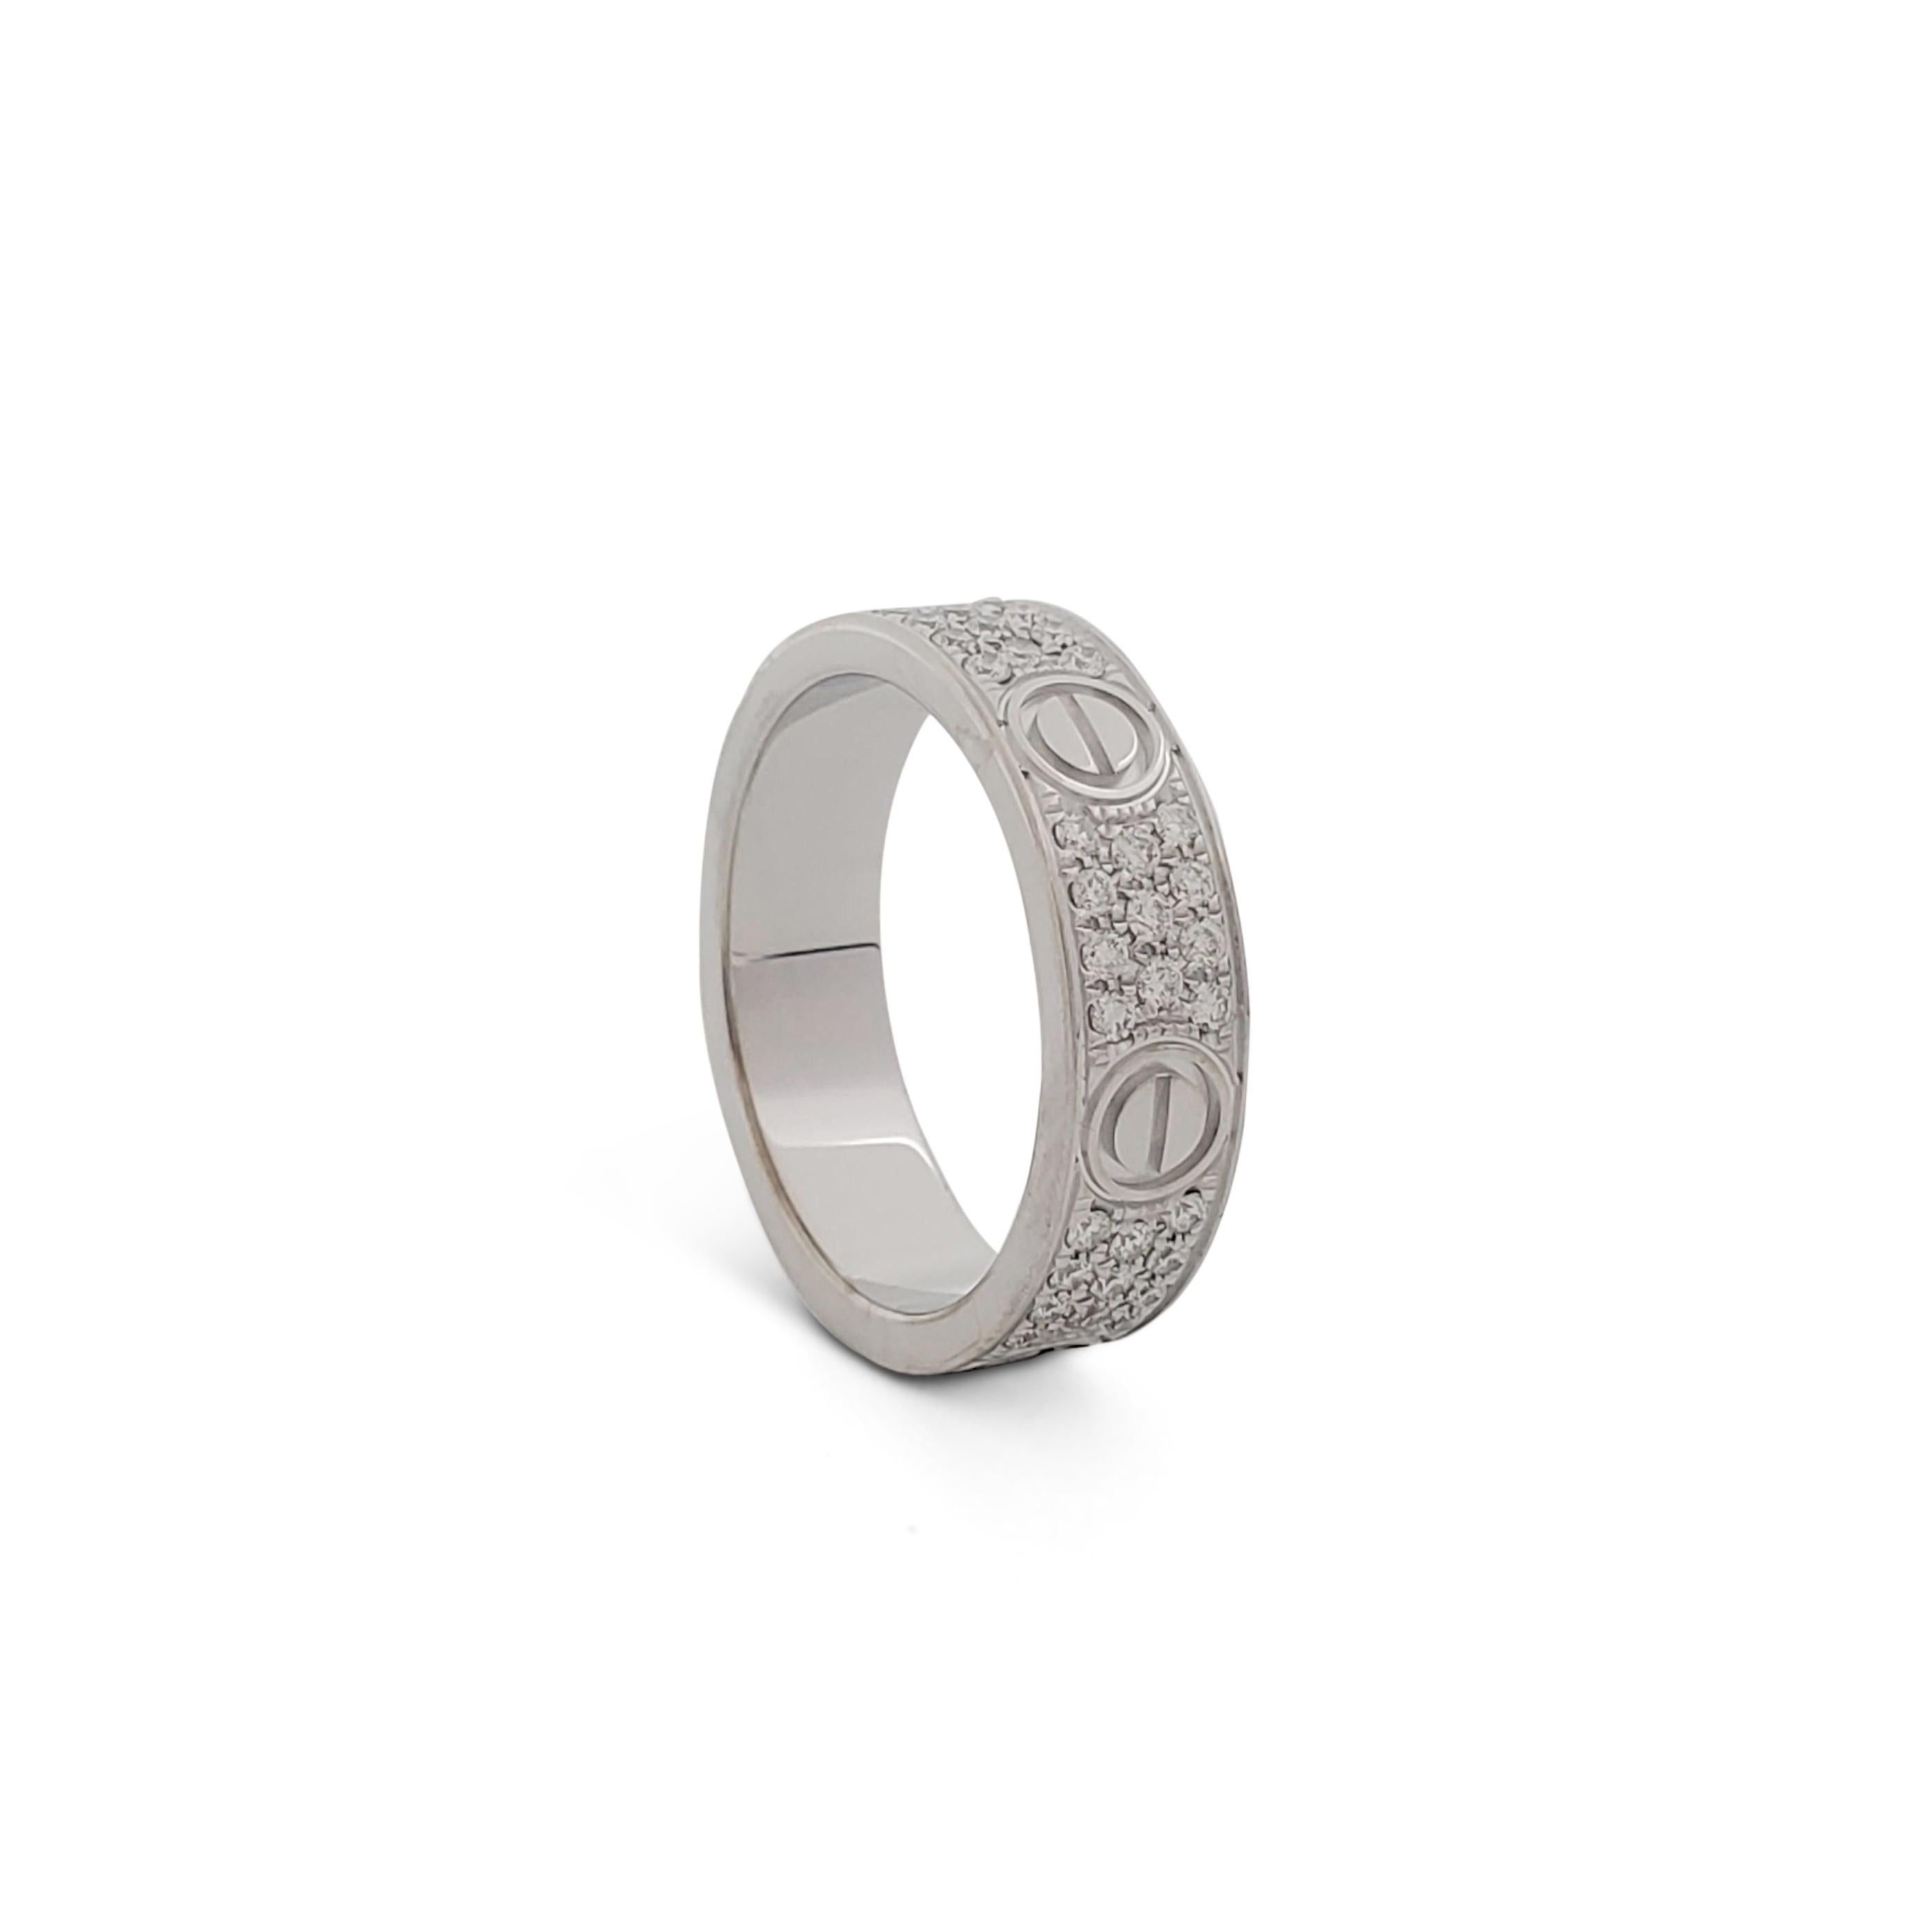 cartier love pave ring